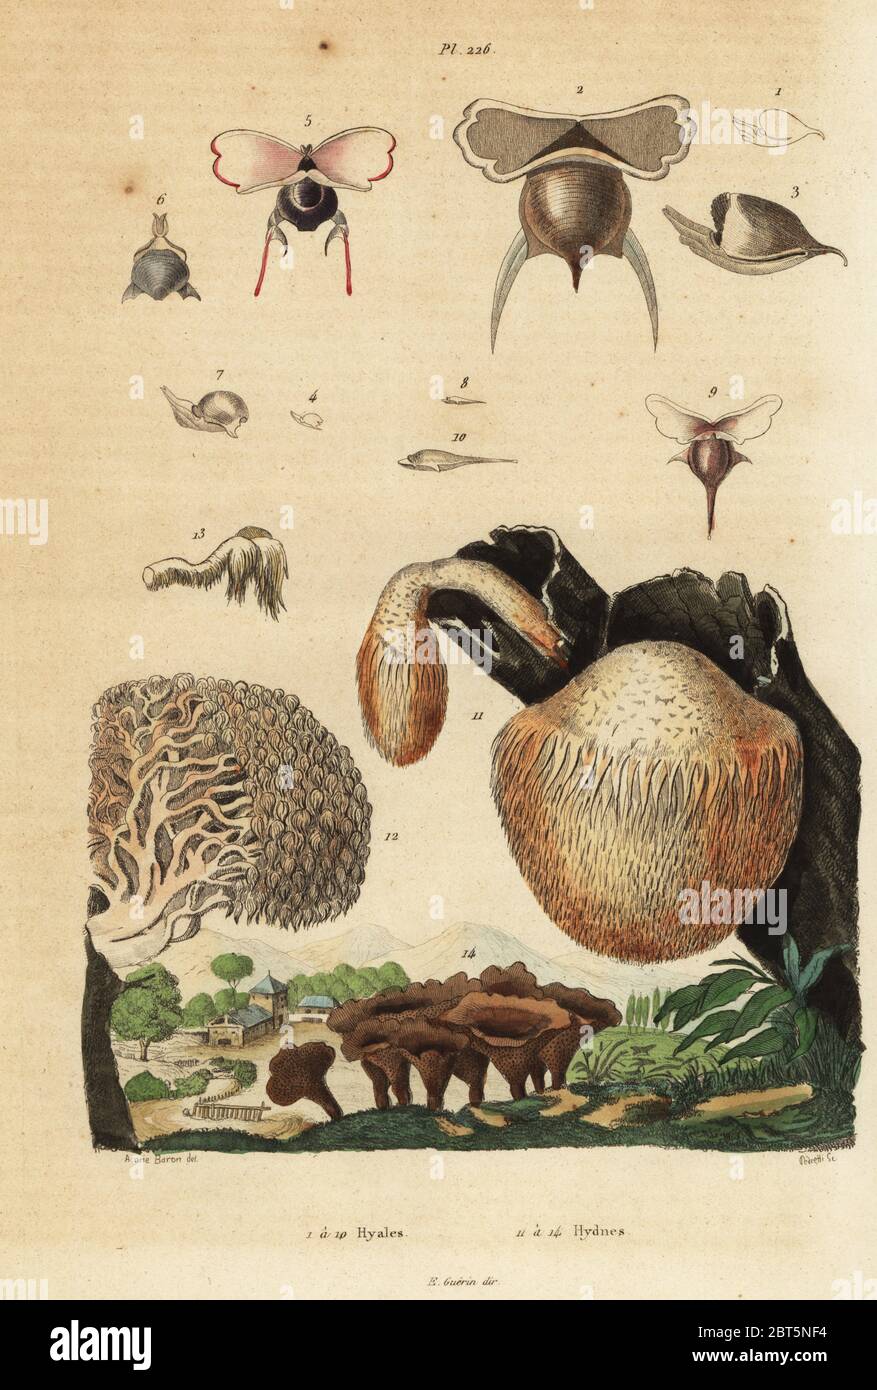 Sea snails, Diacavolinia limbata and Diacria trispinosa 1-10, and Hydnum mushrooms, hedgehog mushroom, Hydnum repandum 14, coral tooth mushroom, Hericium coralloides 12, etc. Hyales , Hydnes. Handcoloured steel engraving by Pedretti after an illustration by A Carie Baron from Felix-Edouard Guerin-Meneville's Dictionnaire Pittoresque d'Histoire Naturelle (Picturesque Dictionary of Natural History), Paris, 1834-39. Stock Photo